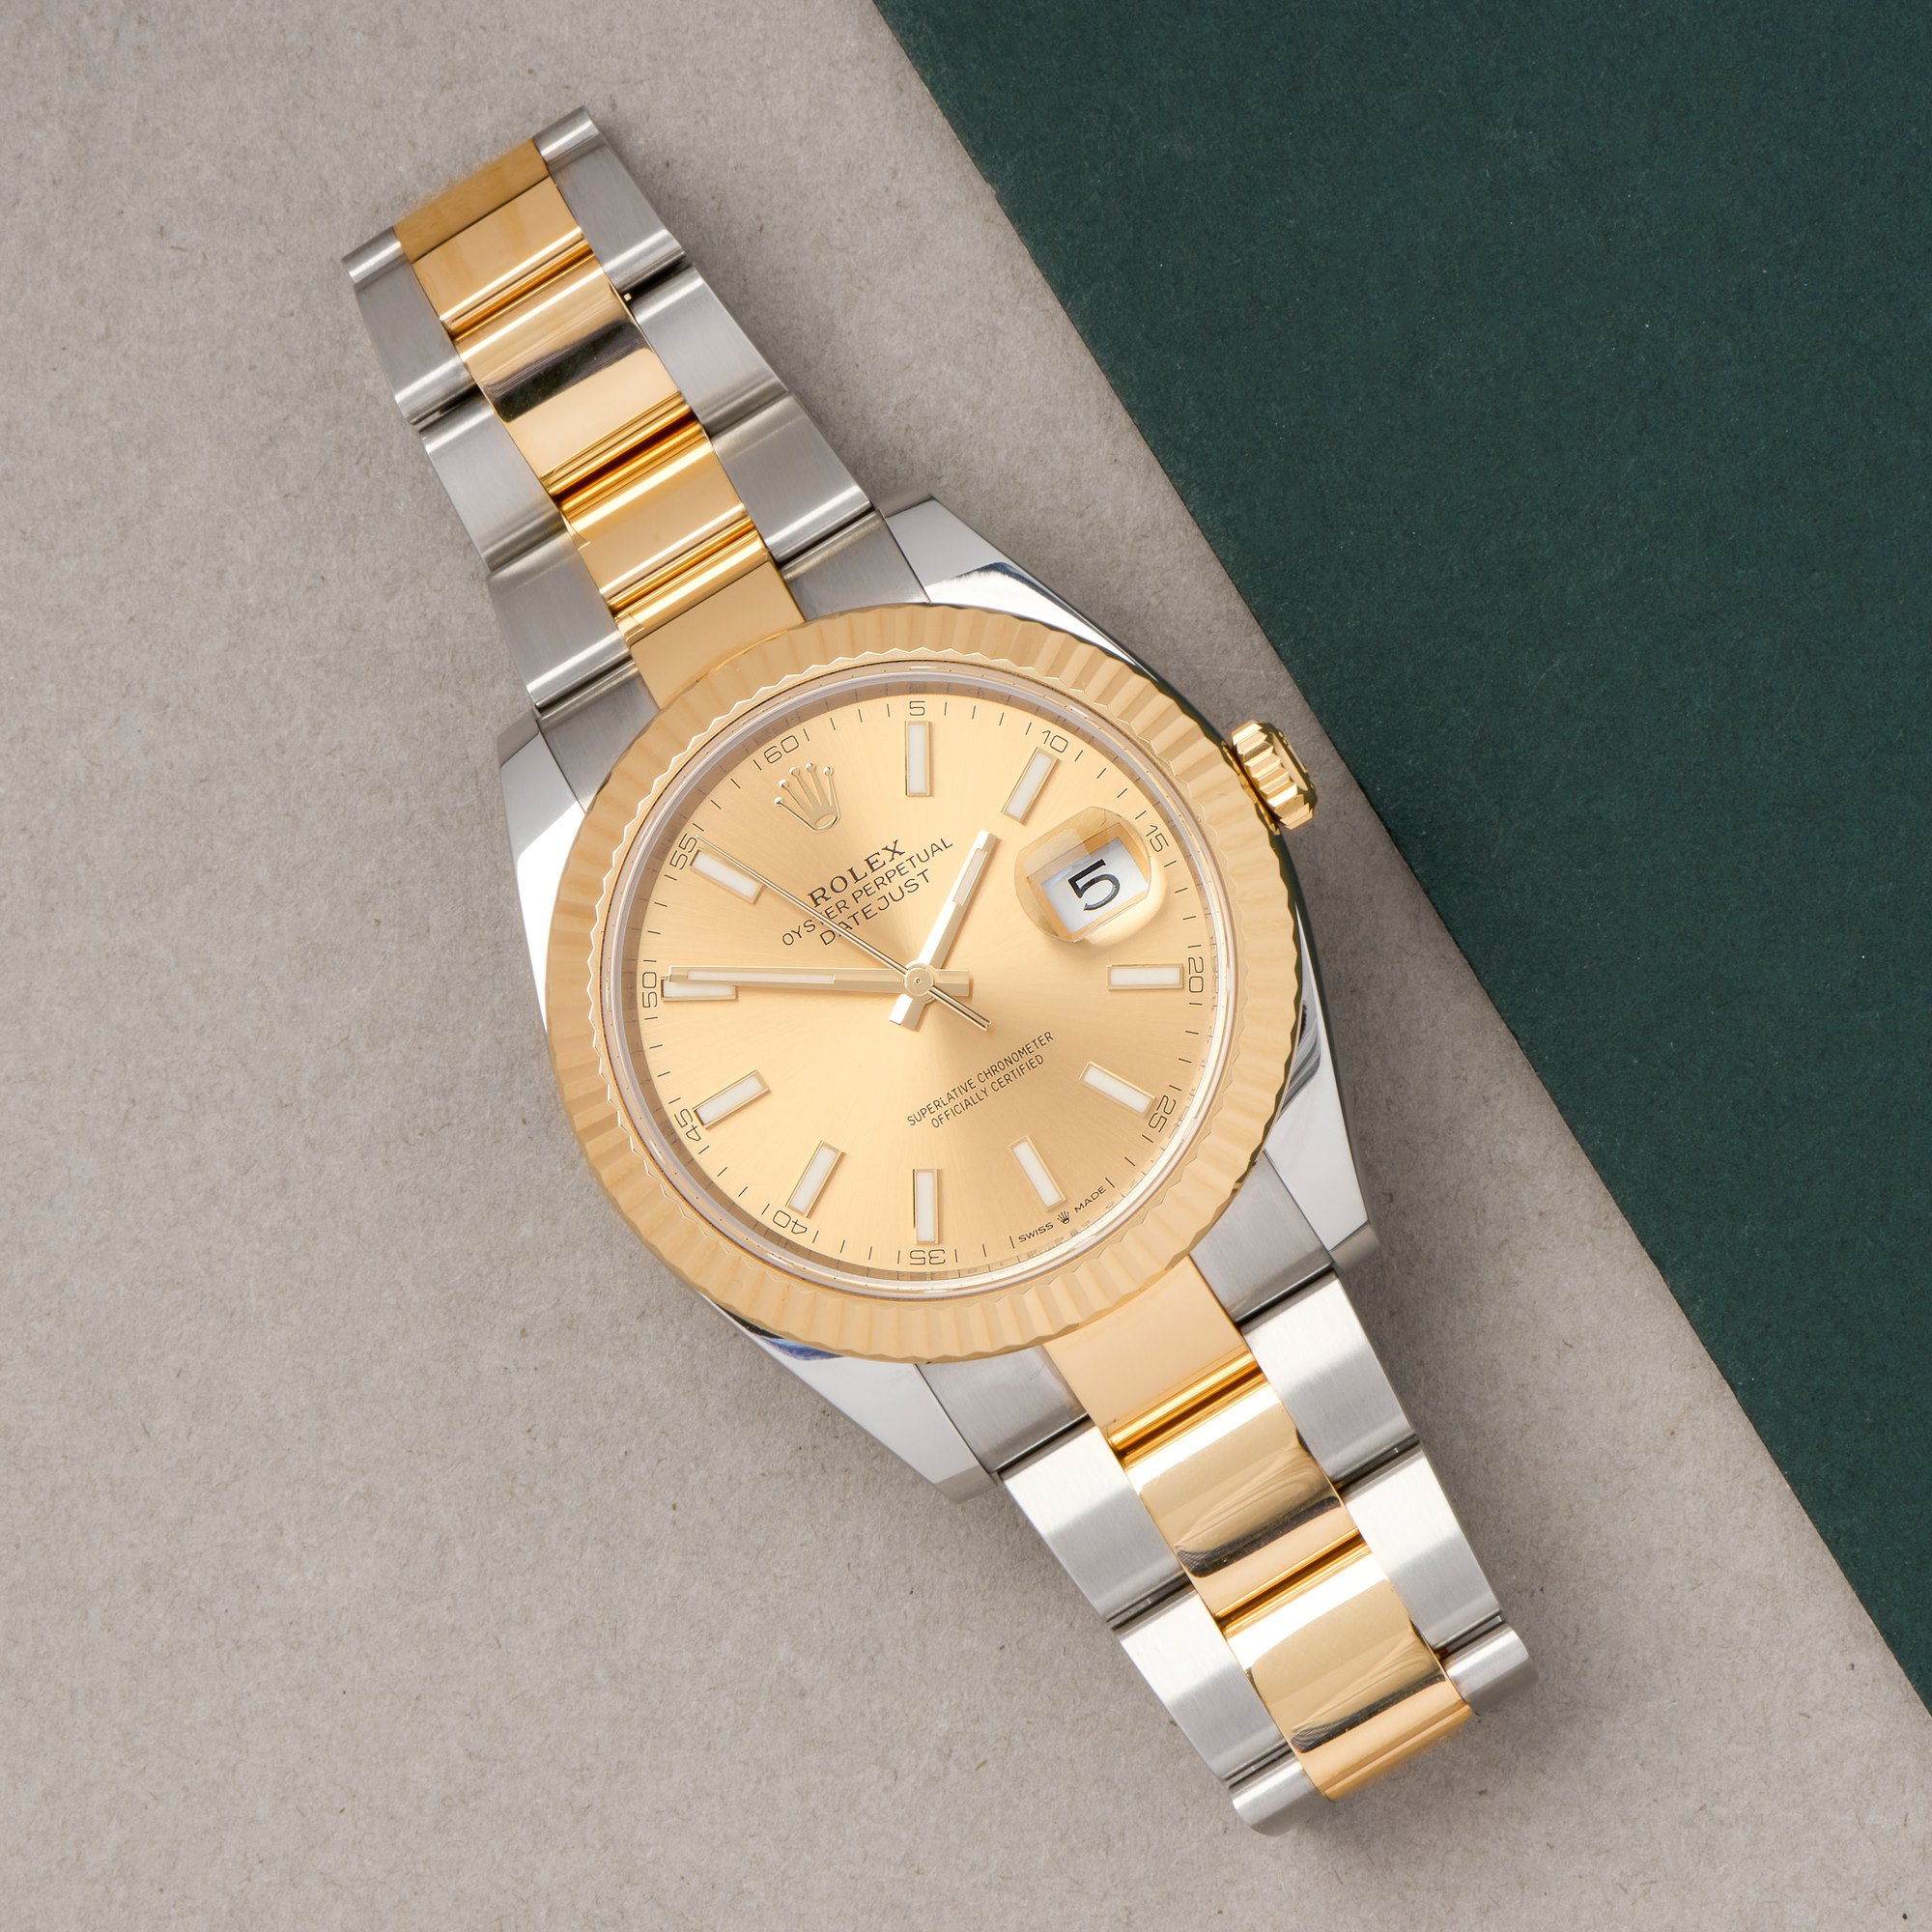 Rolex Datejust 18K Yellow Gold & Stainless Steel 126333